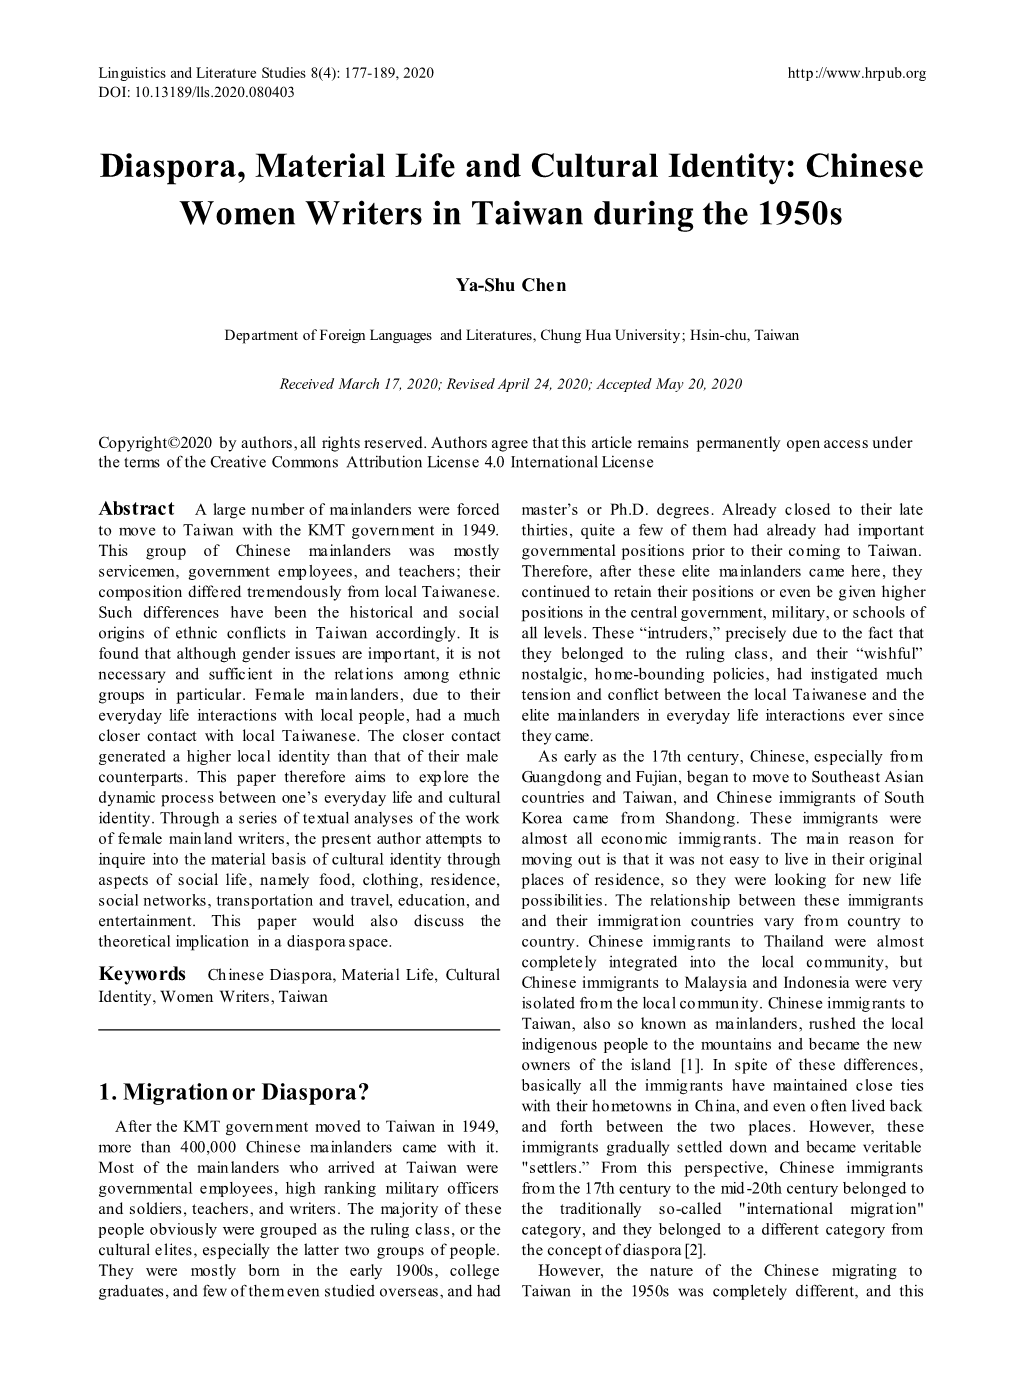 Diaspora, Material Life and Cultural Identity: Chinese Women Writers in Taiwan During the 1950S